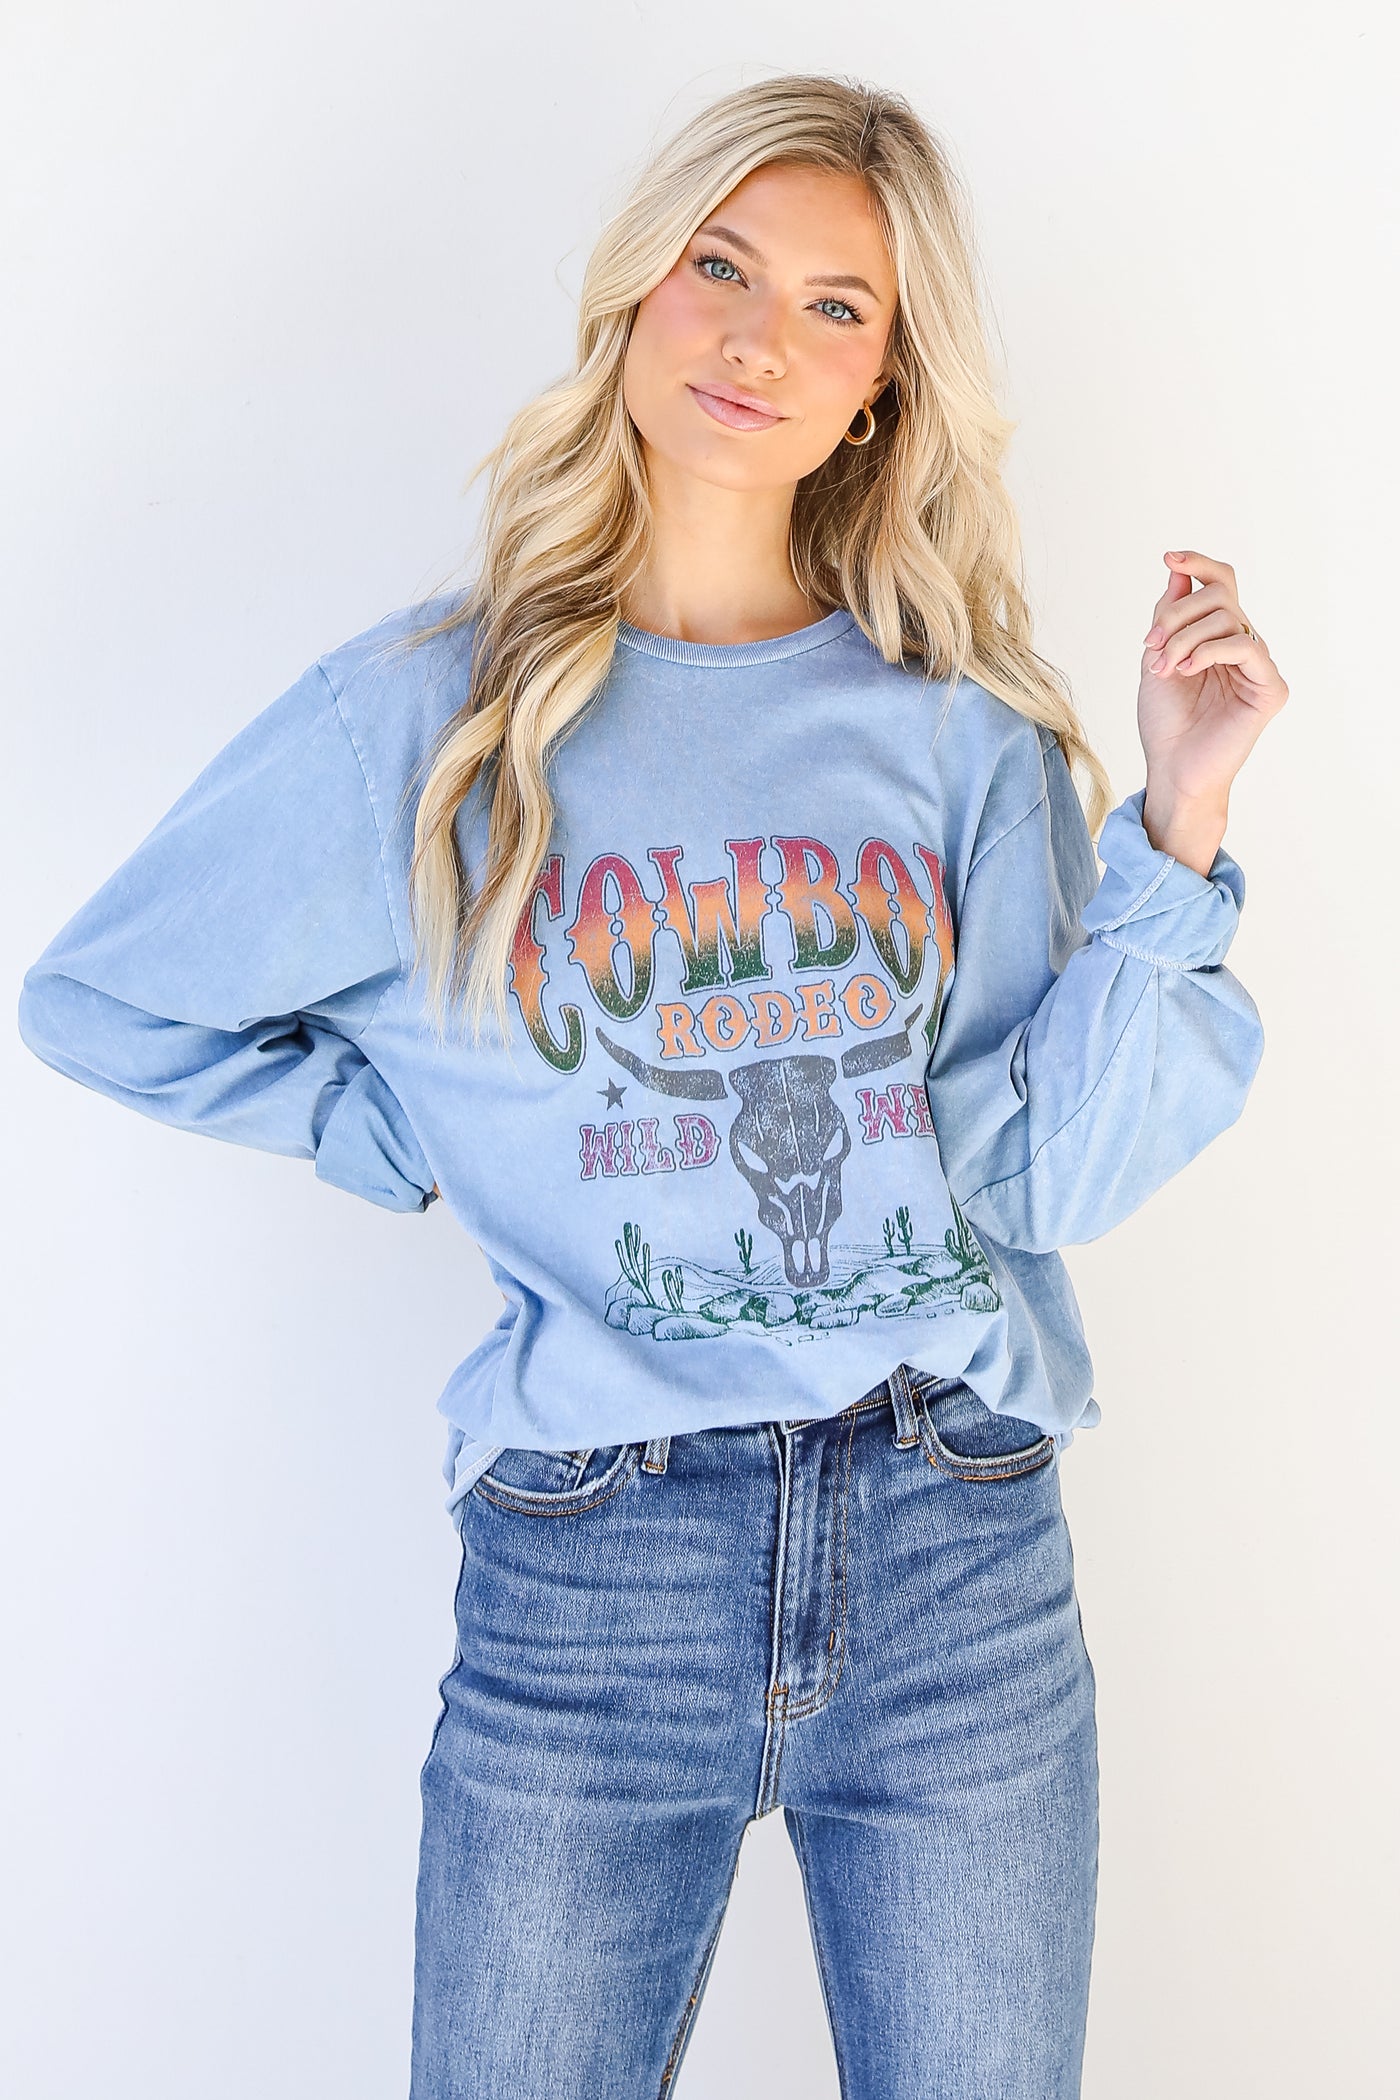 Cowboy Rodeo Long Sleeve Tee from dress up